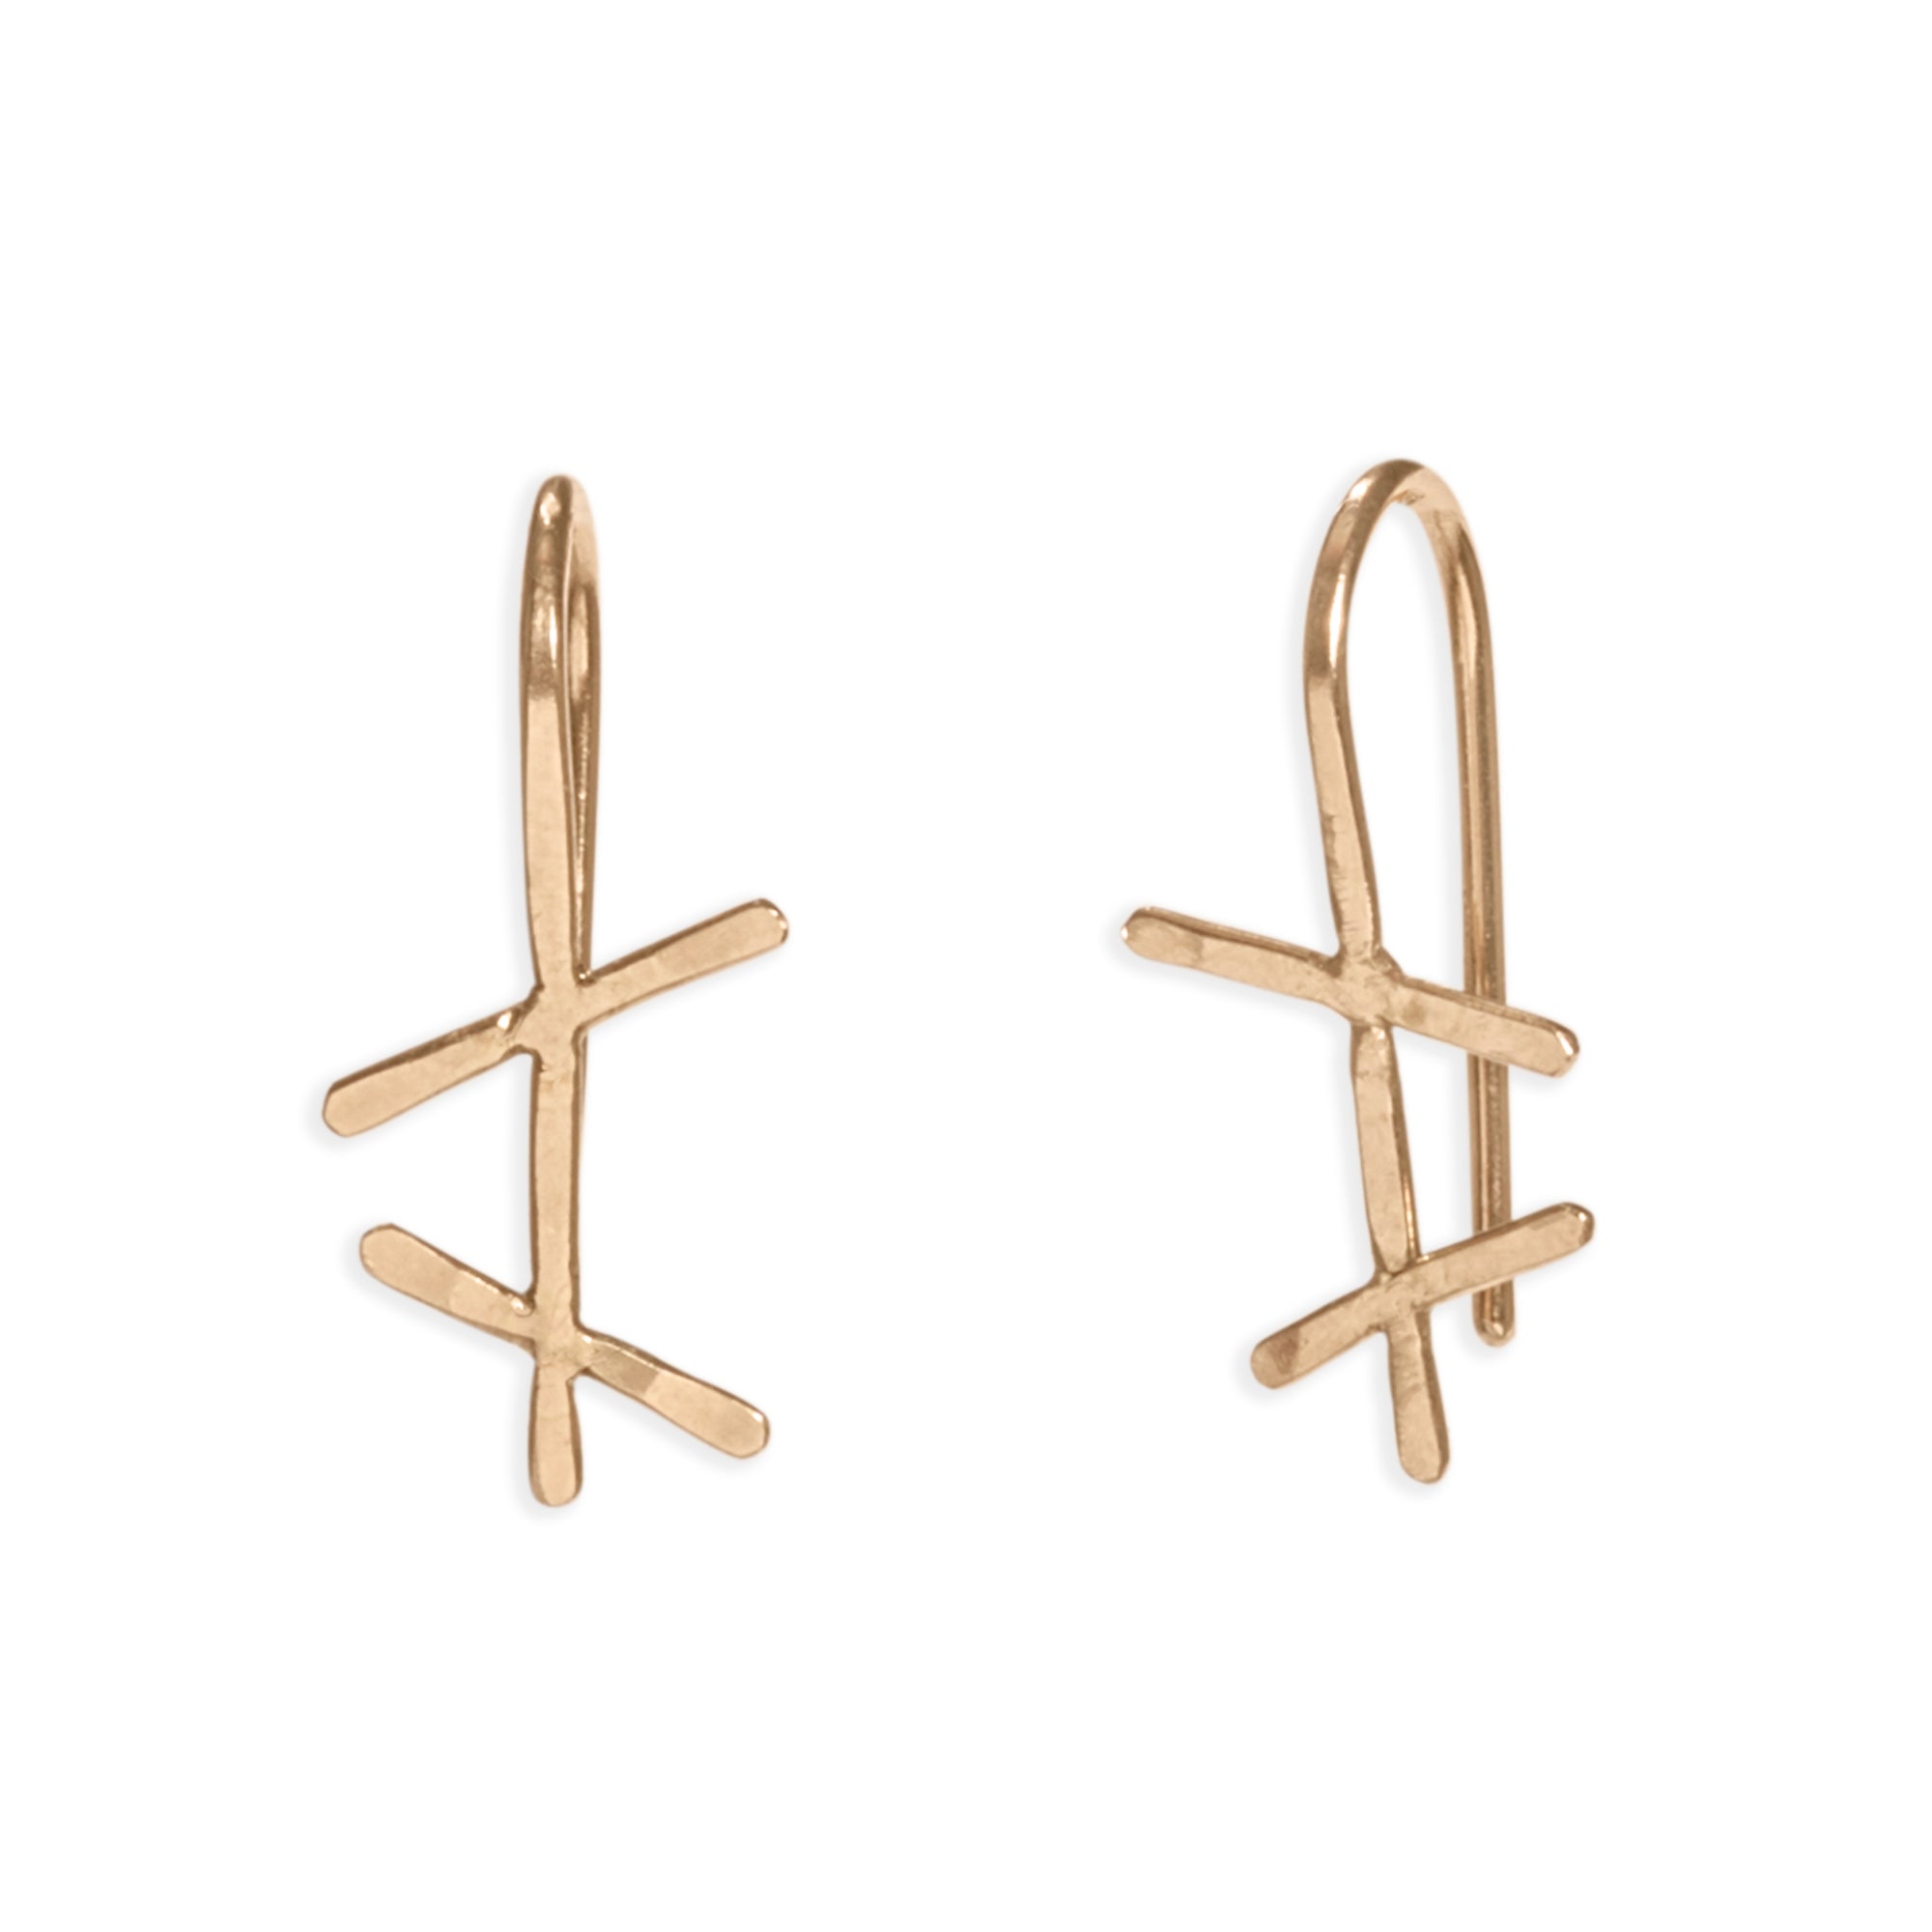 Chaos hook, modern hook earrings made from 14k gold, featuring a hammered wire drop with two intersecting bars.